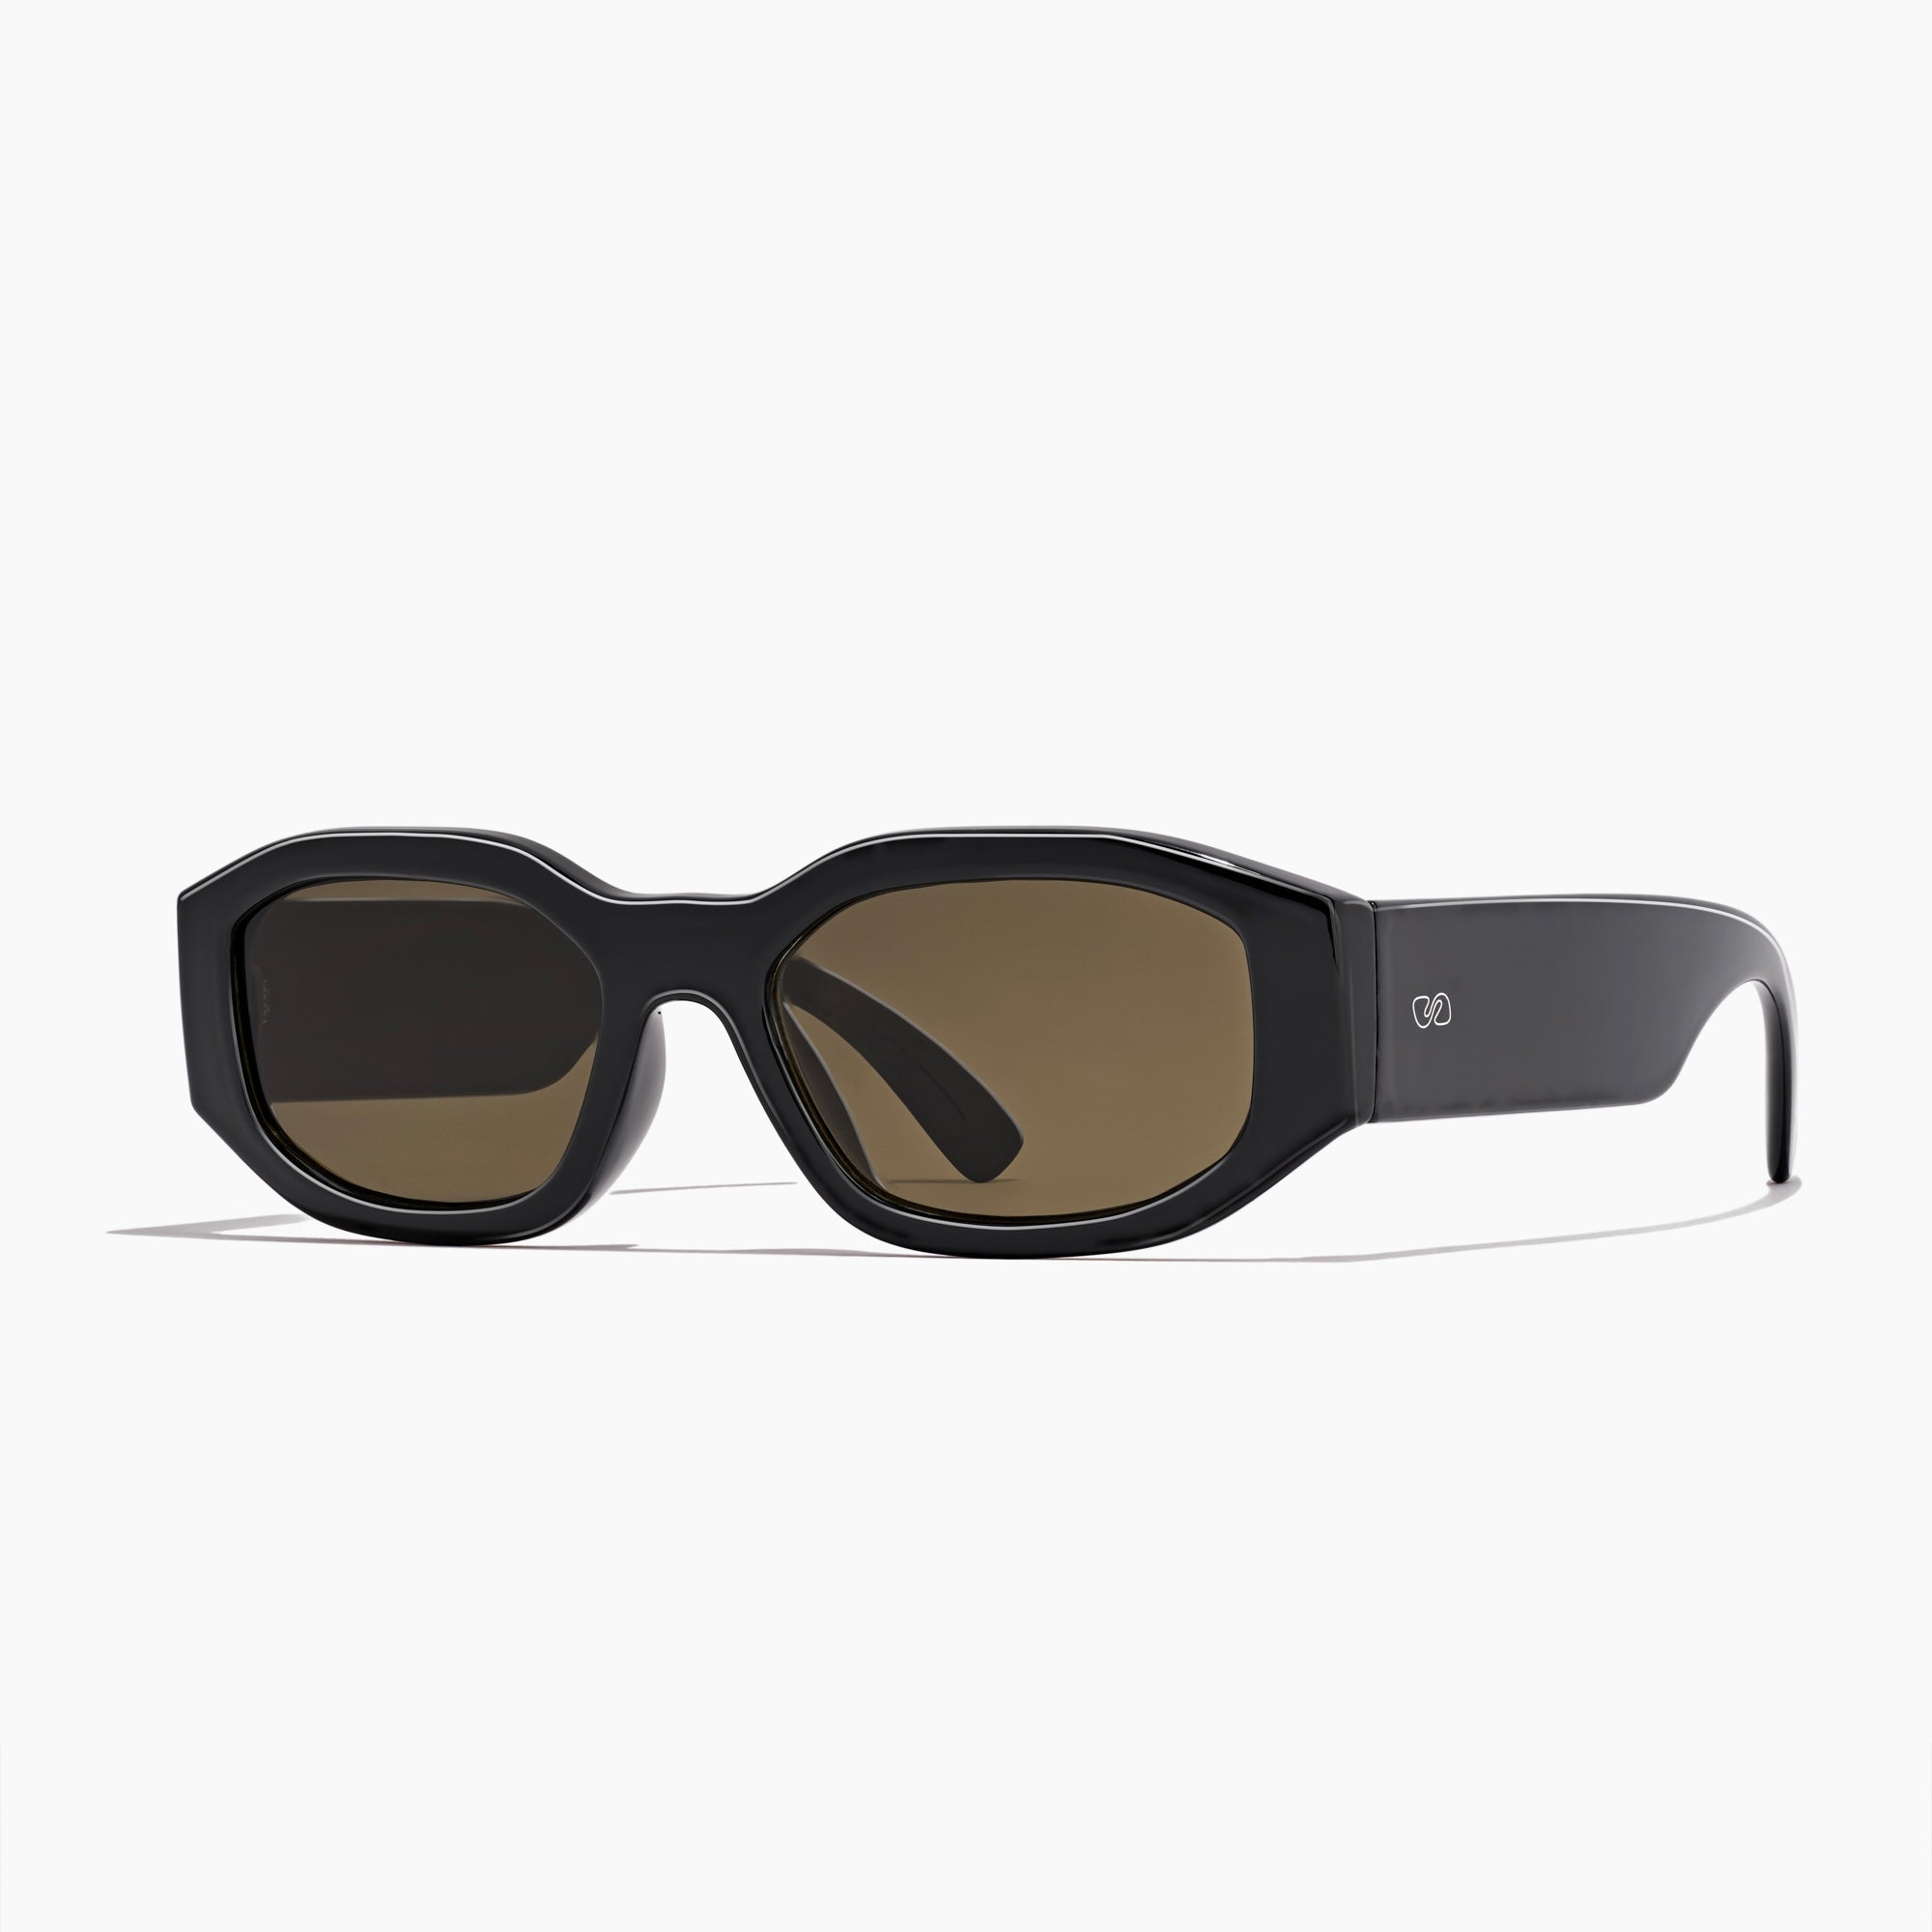 East Side Sunglasses in black and sepia